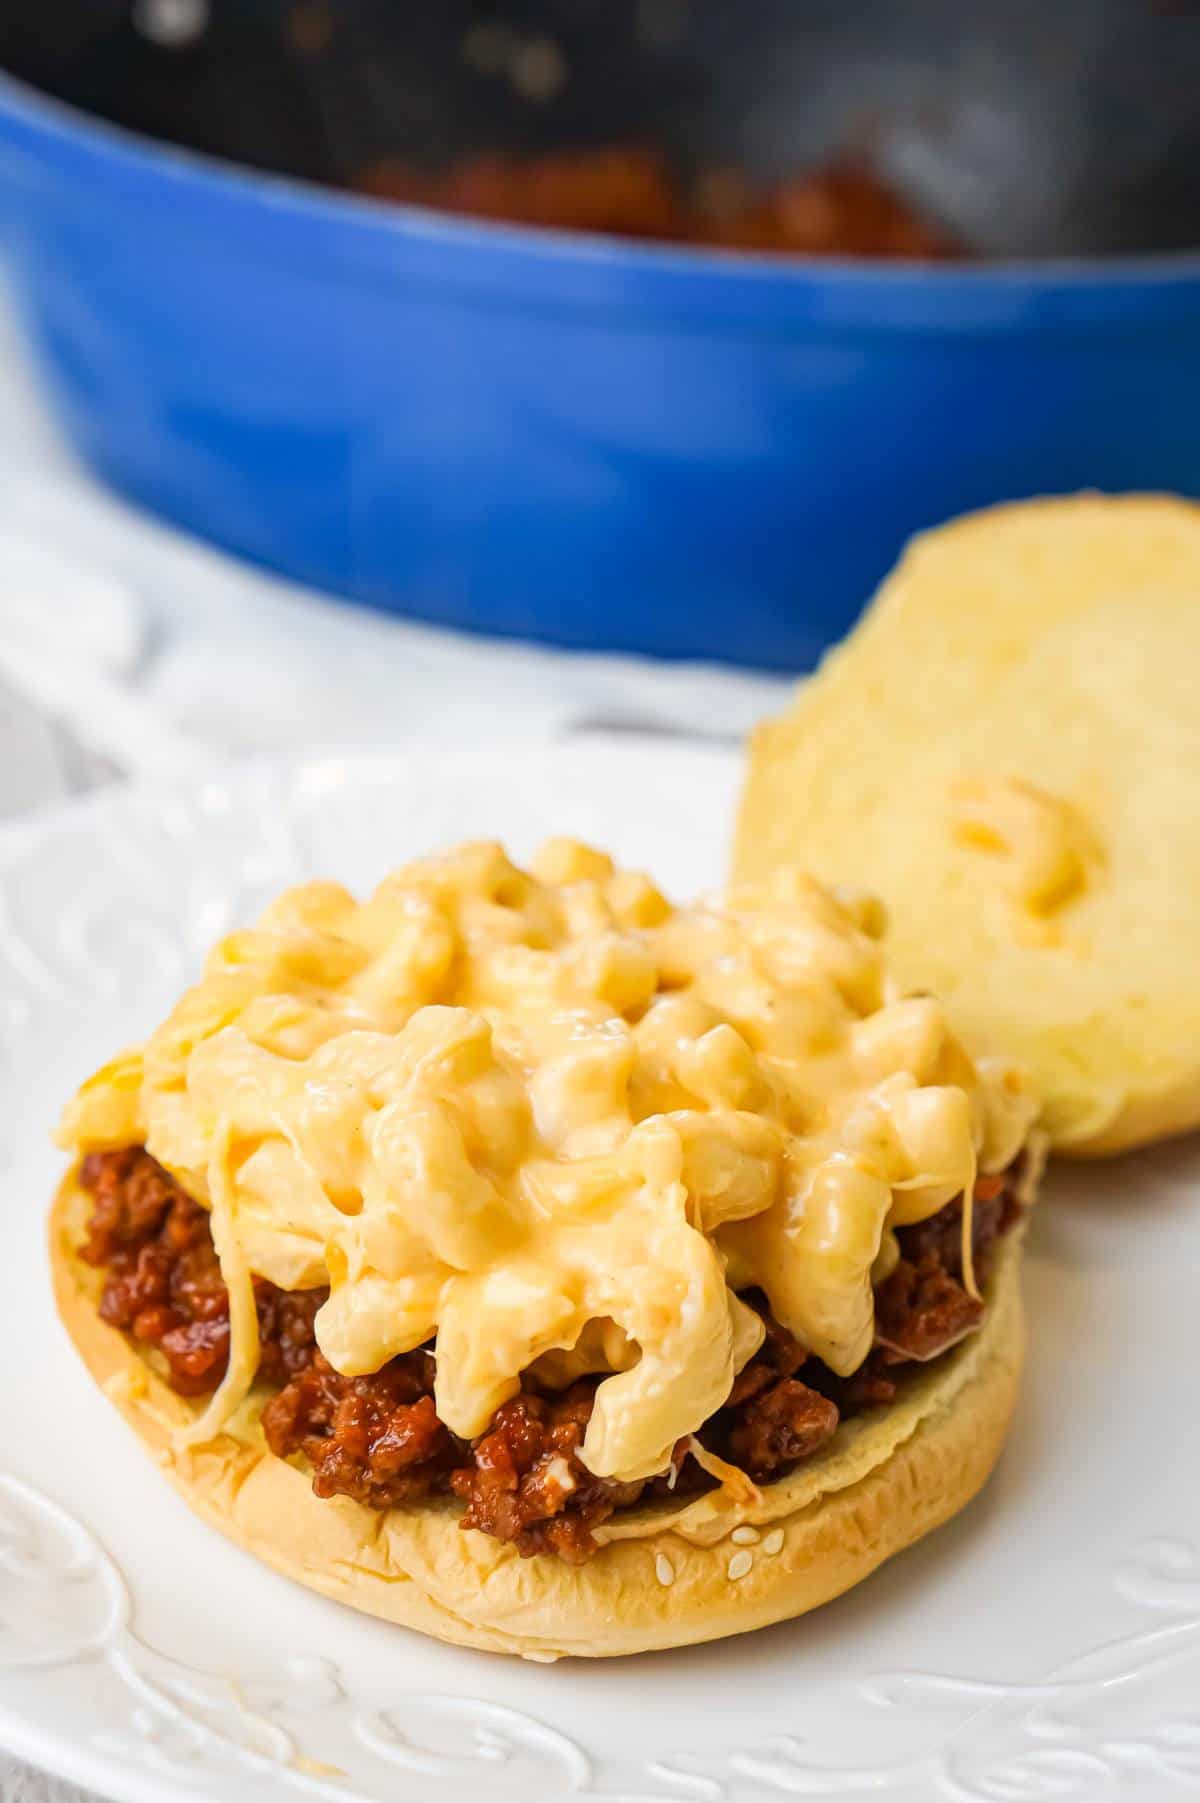 Mac and Cheese Sloppy Joes are hearty ground beef sandwiches topped with macaroni and cheese.